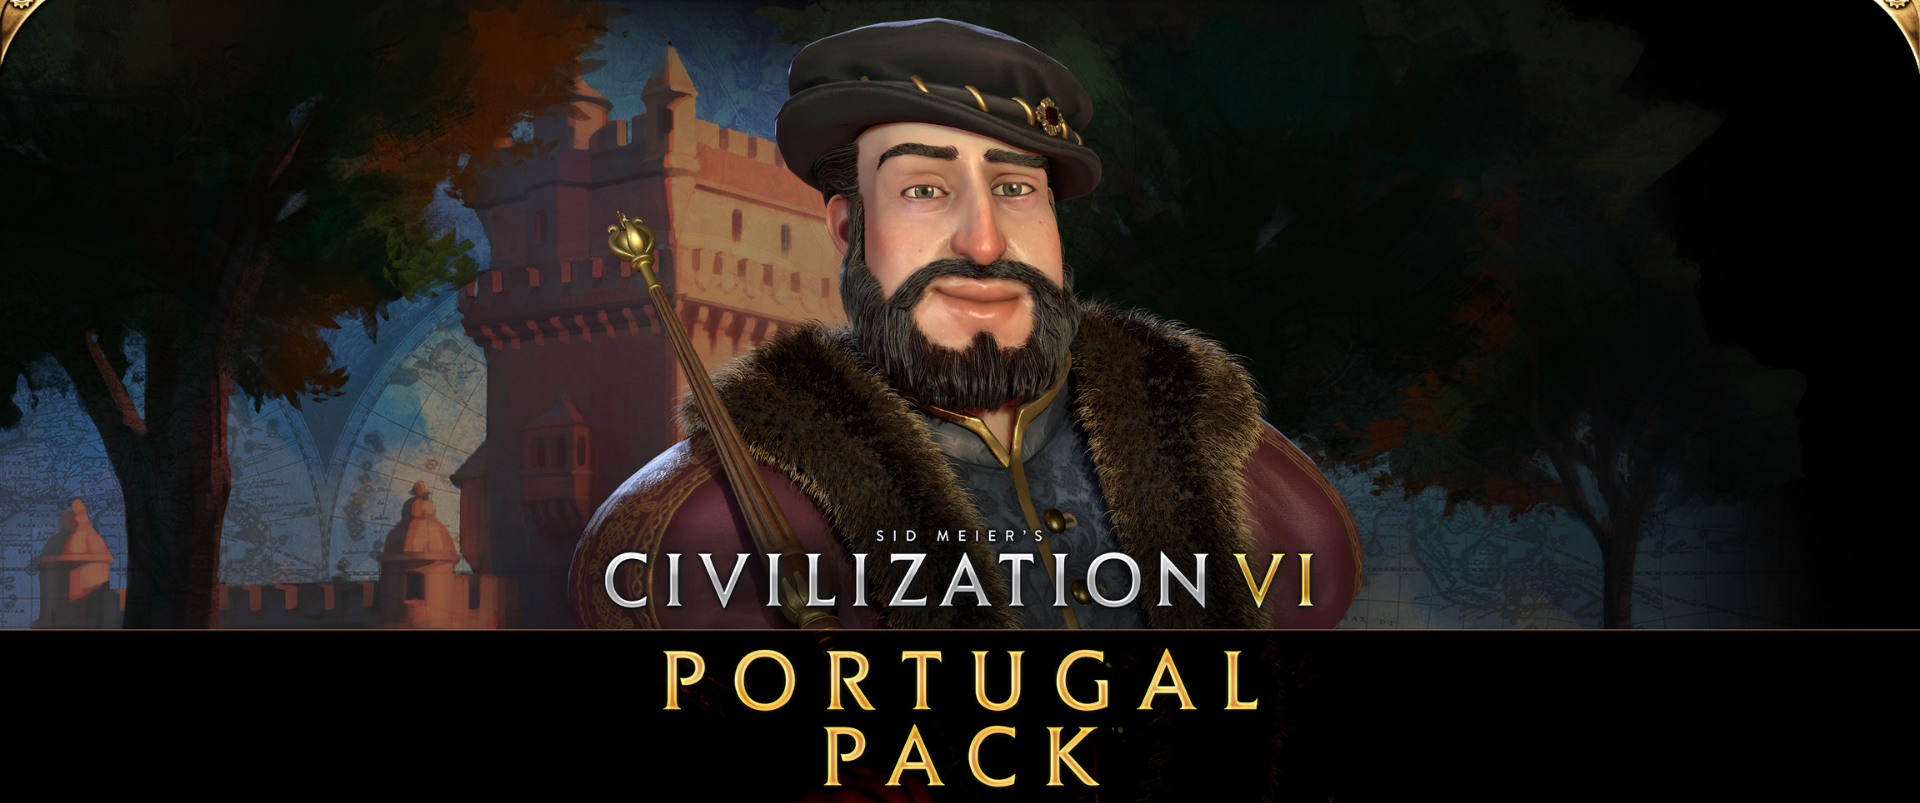 can you play civ 5 multiplayer dlc